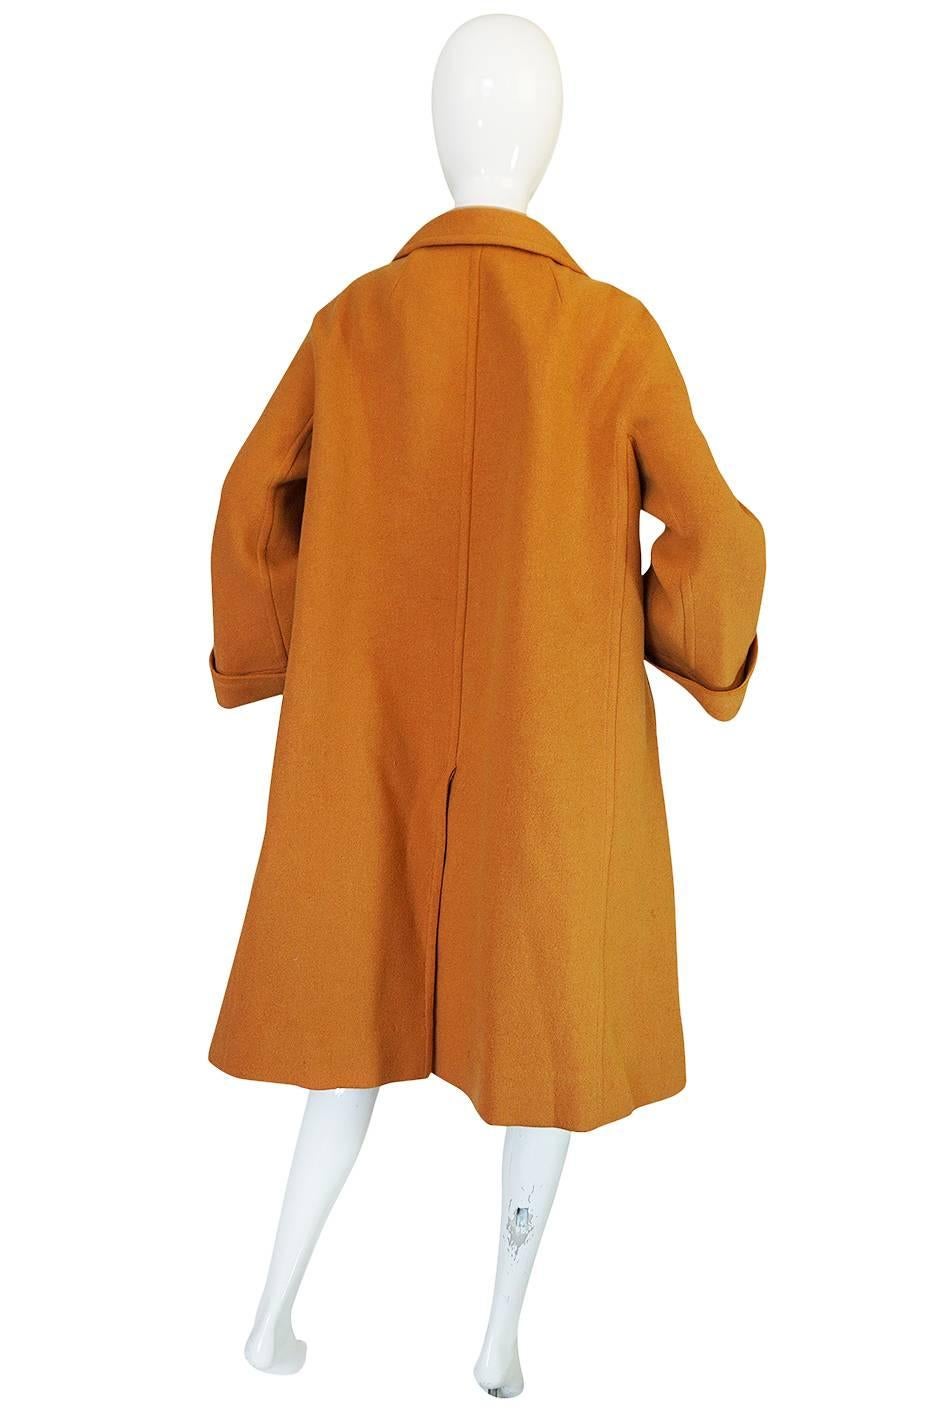 A fantastic swing coat by Pierre Balmain in a wonderful goldenrod color that is so flattering on. The coat is made of a lightweight wool that is very comfortable to wear but warm. The cut is a fabulous example of the loose, yet sculptural styles of